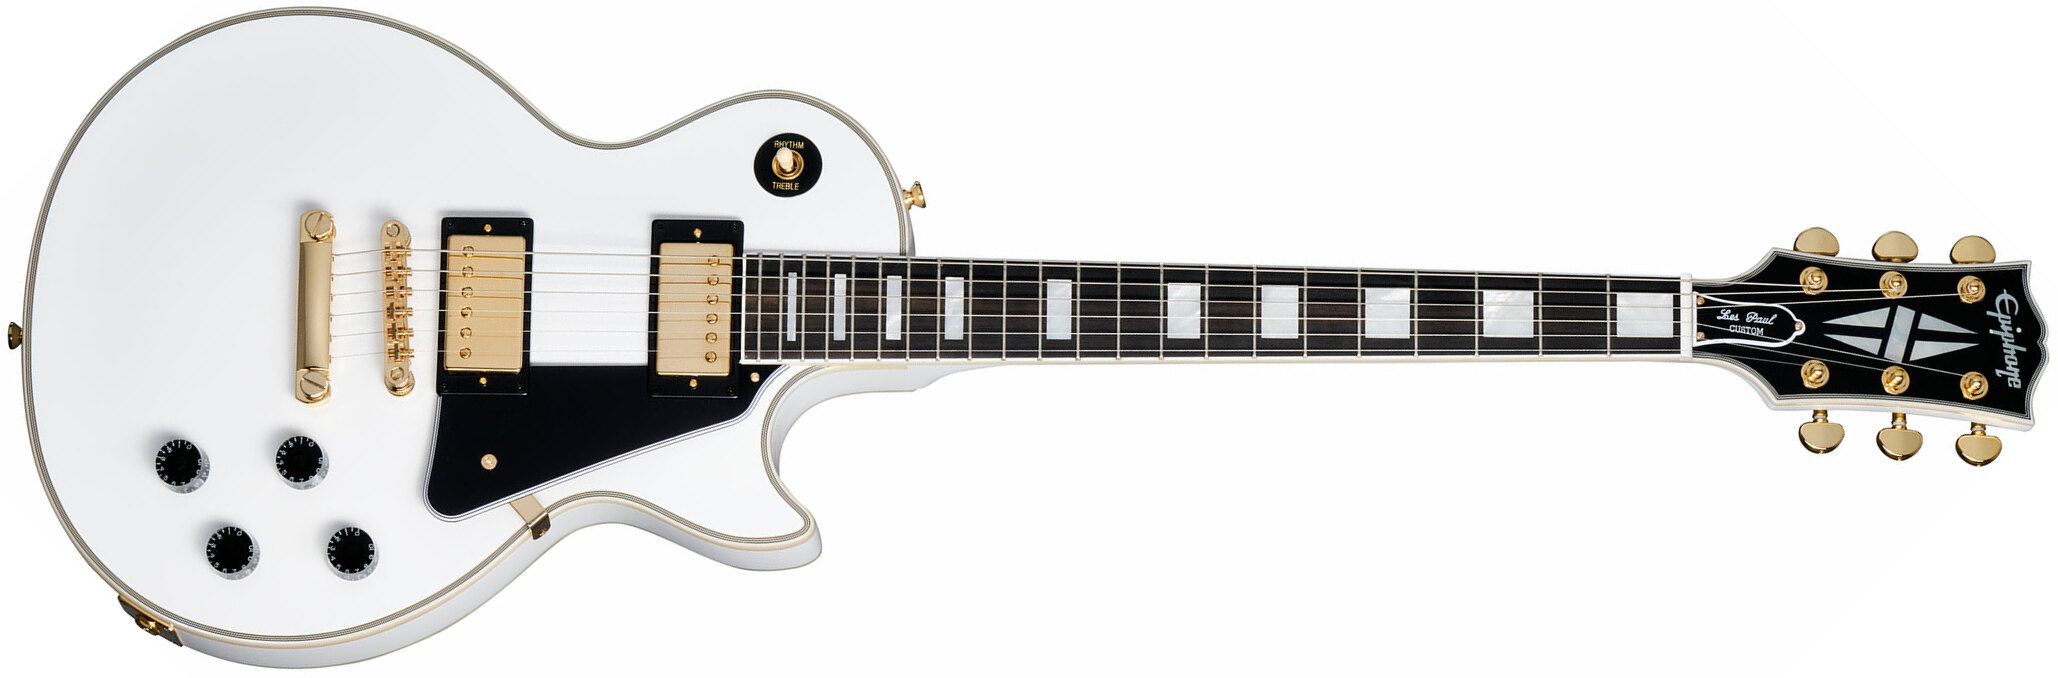 Epiphone Les Paul Custom Inspired By 2h Ht Eb - Alpine White - Single cut electric guitar - Main picture